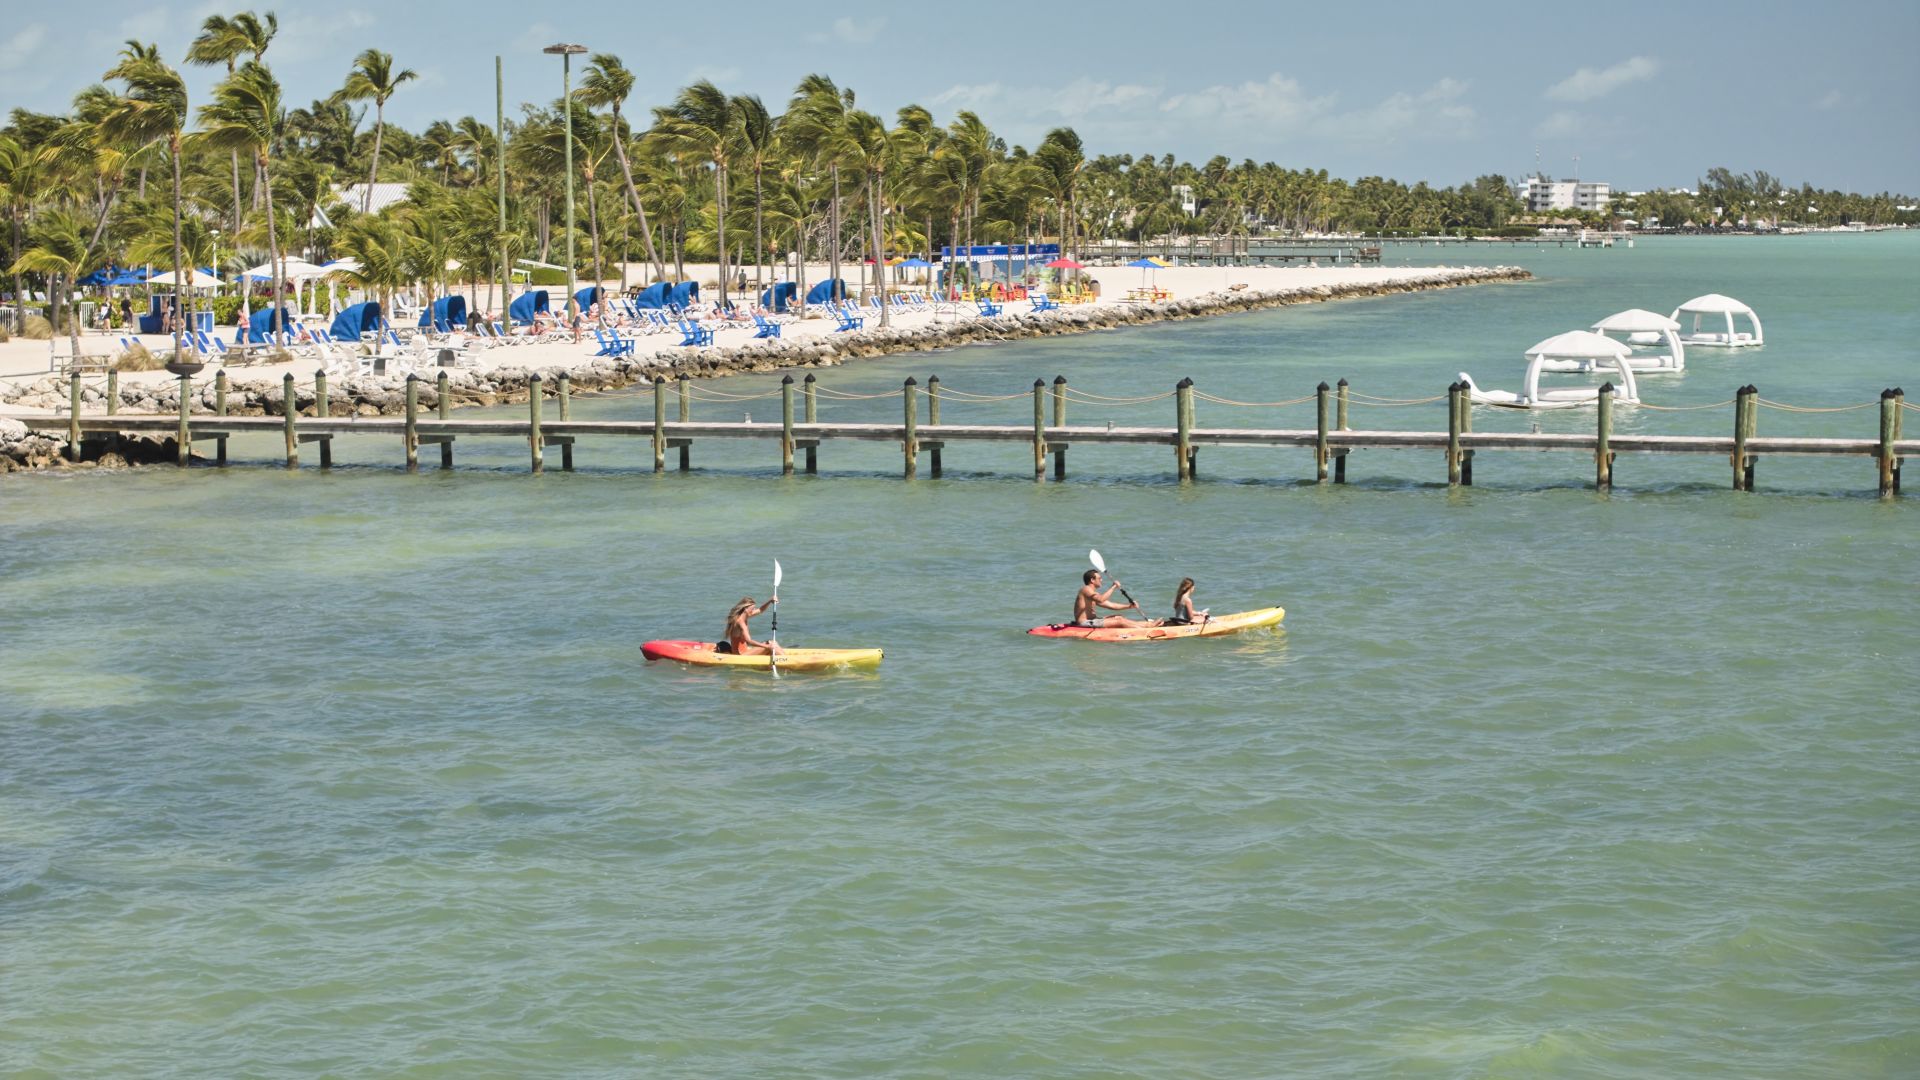 A Couple Of People In Kayaks In A Body Of Water By A Dock And A Beach